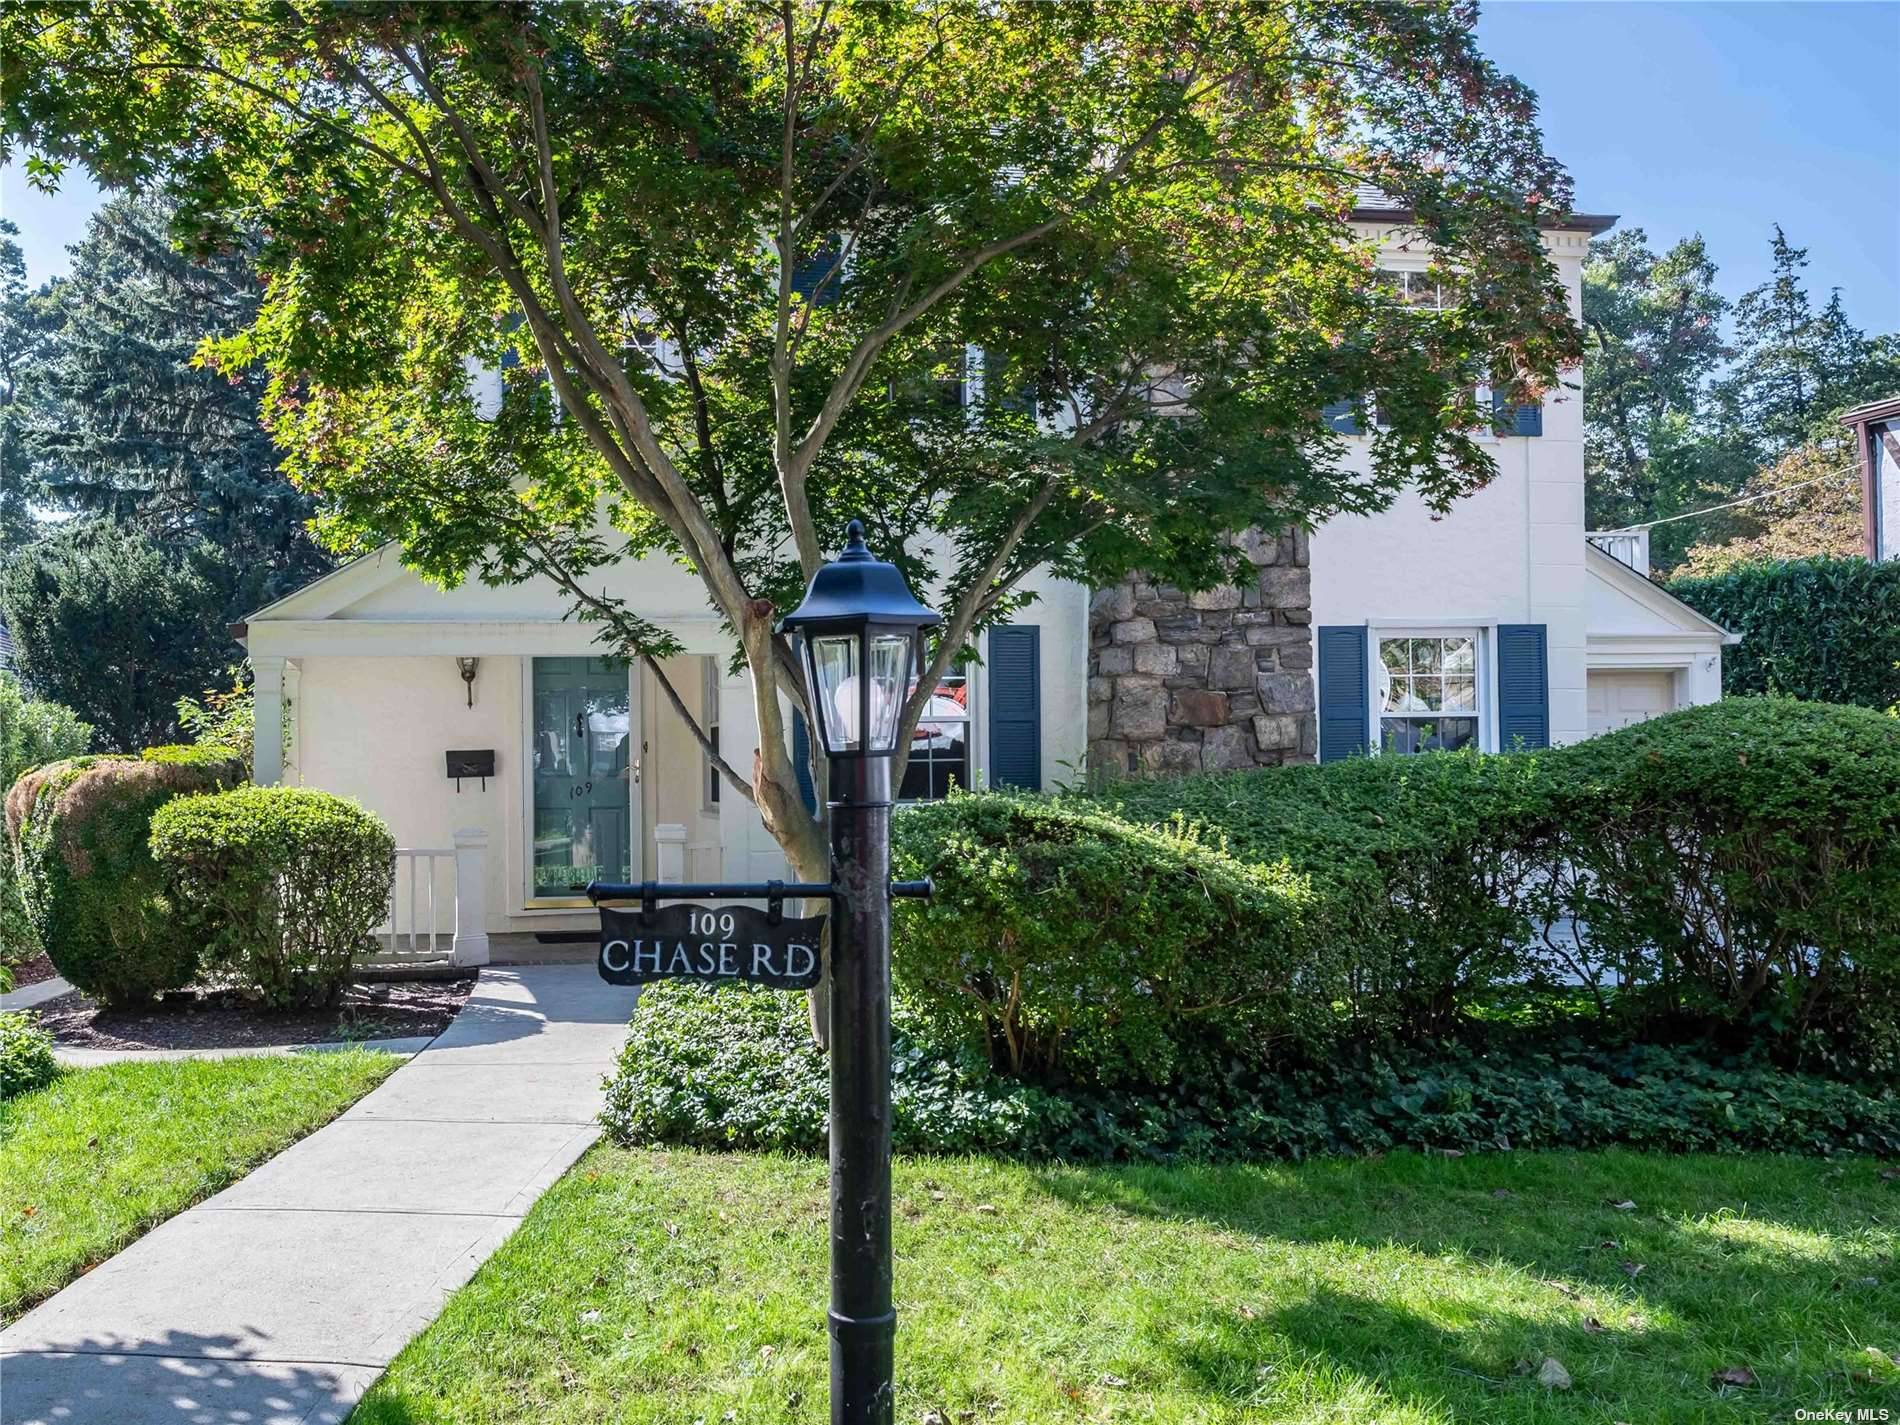 Nestled on a beautiful tree lined street, this completely renovated home checks all the boxes.